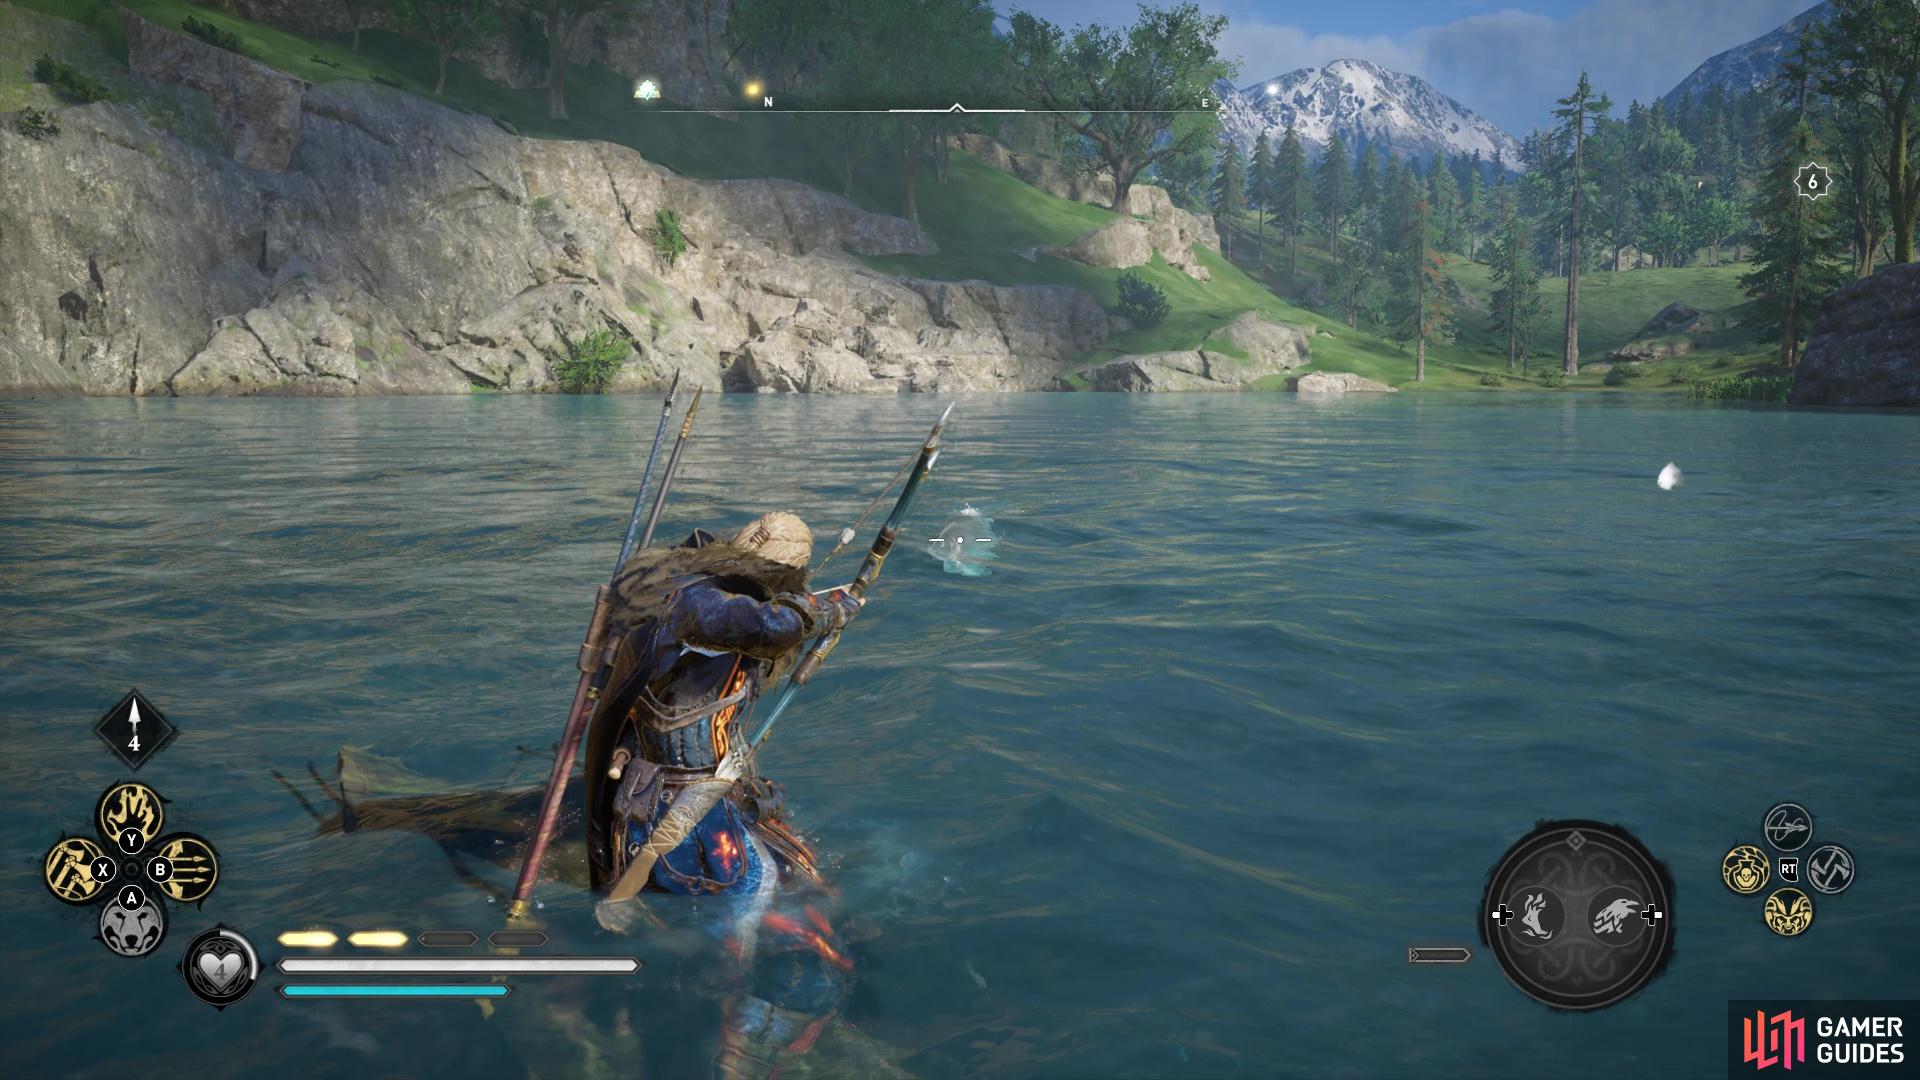 Find the largest fish in the nearby waters and shoot it (or use your fishing rod).